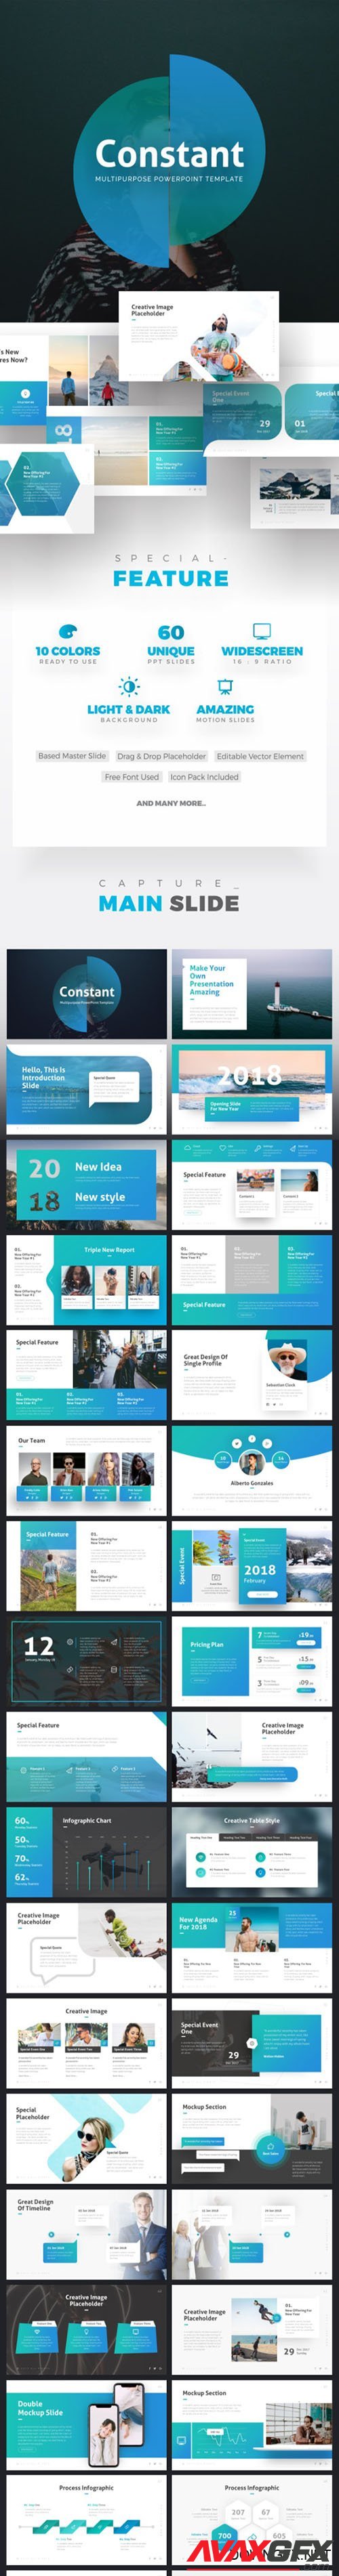 Graphicriver - Constant Multipurpose PowerPoint Template 23635949